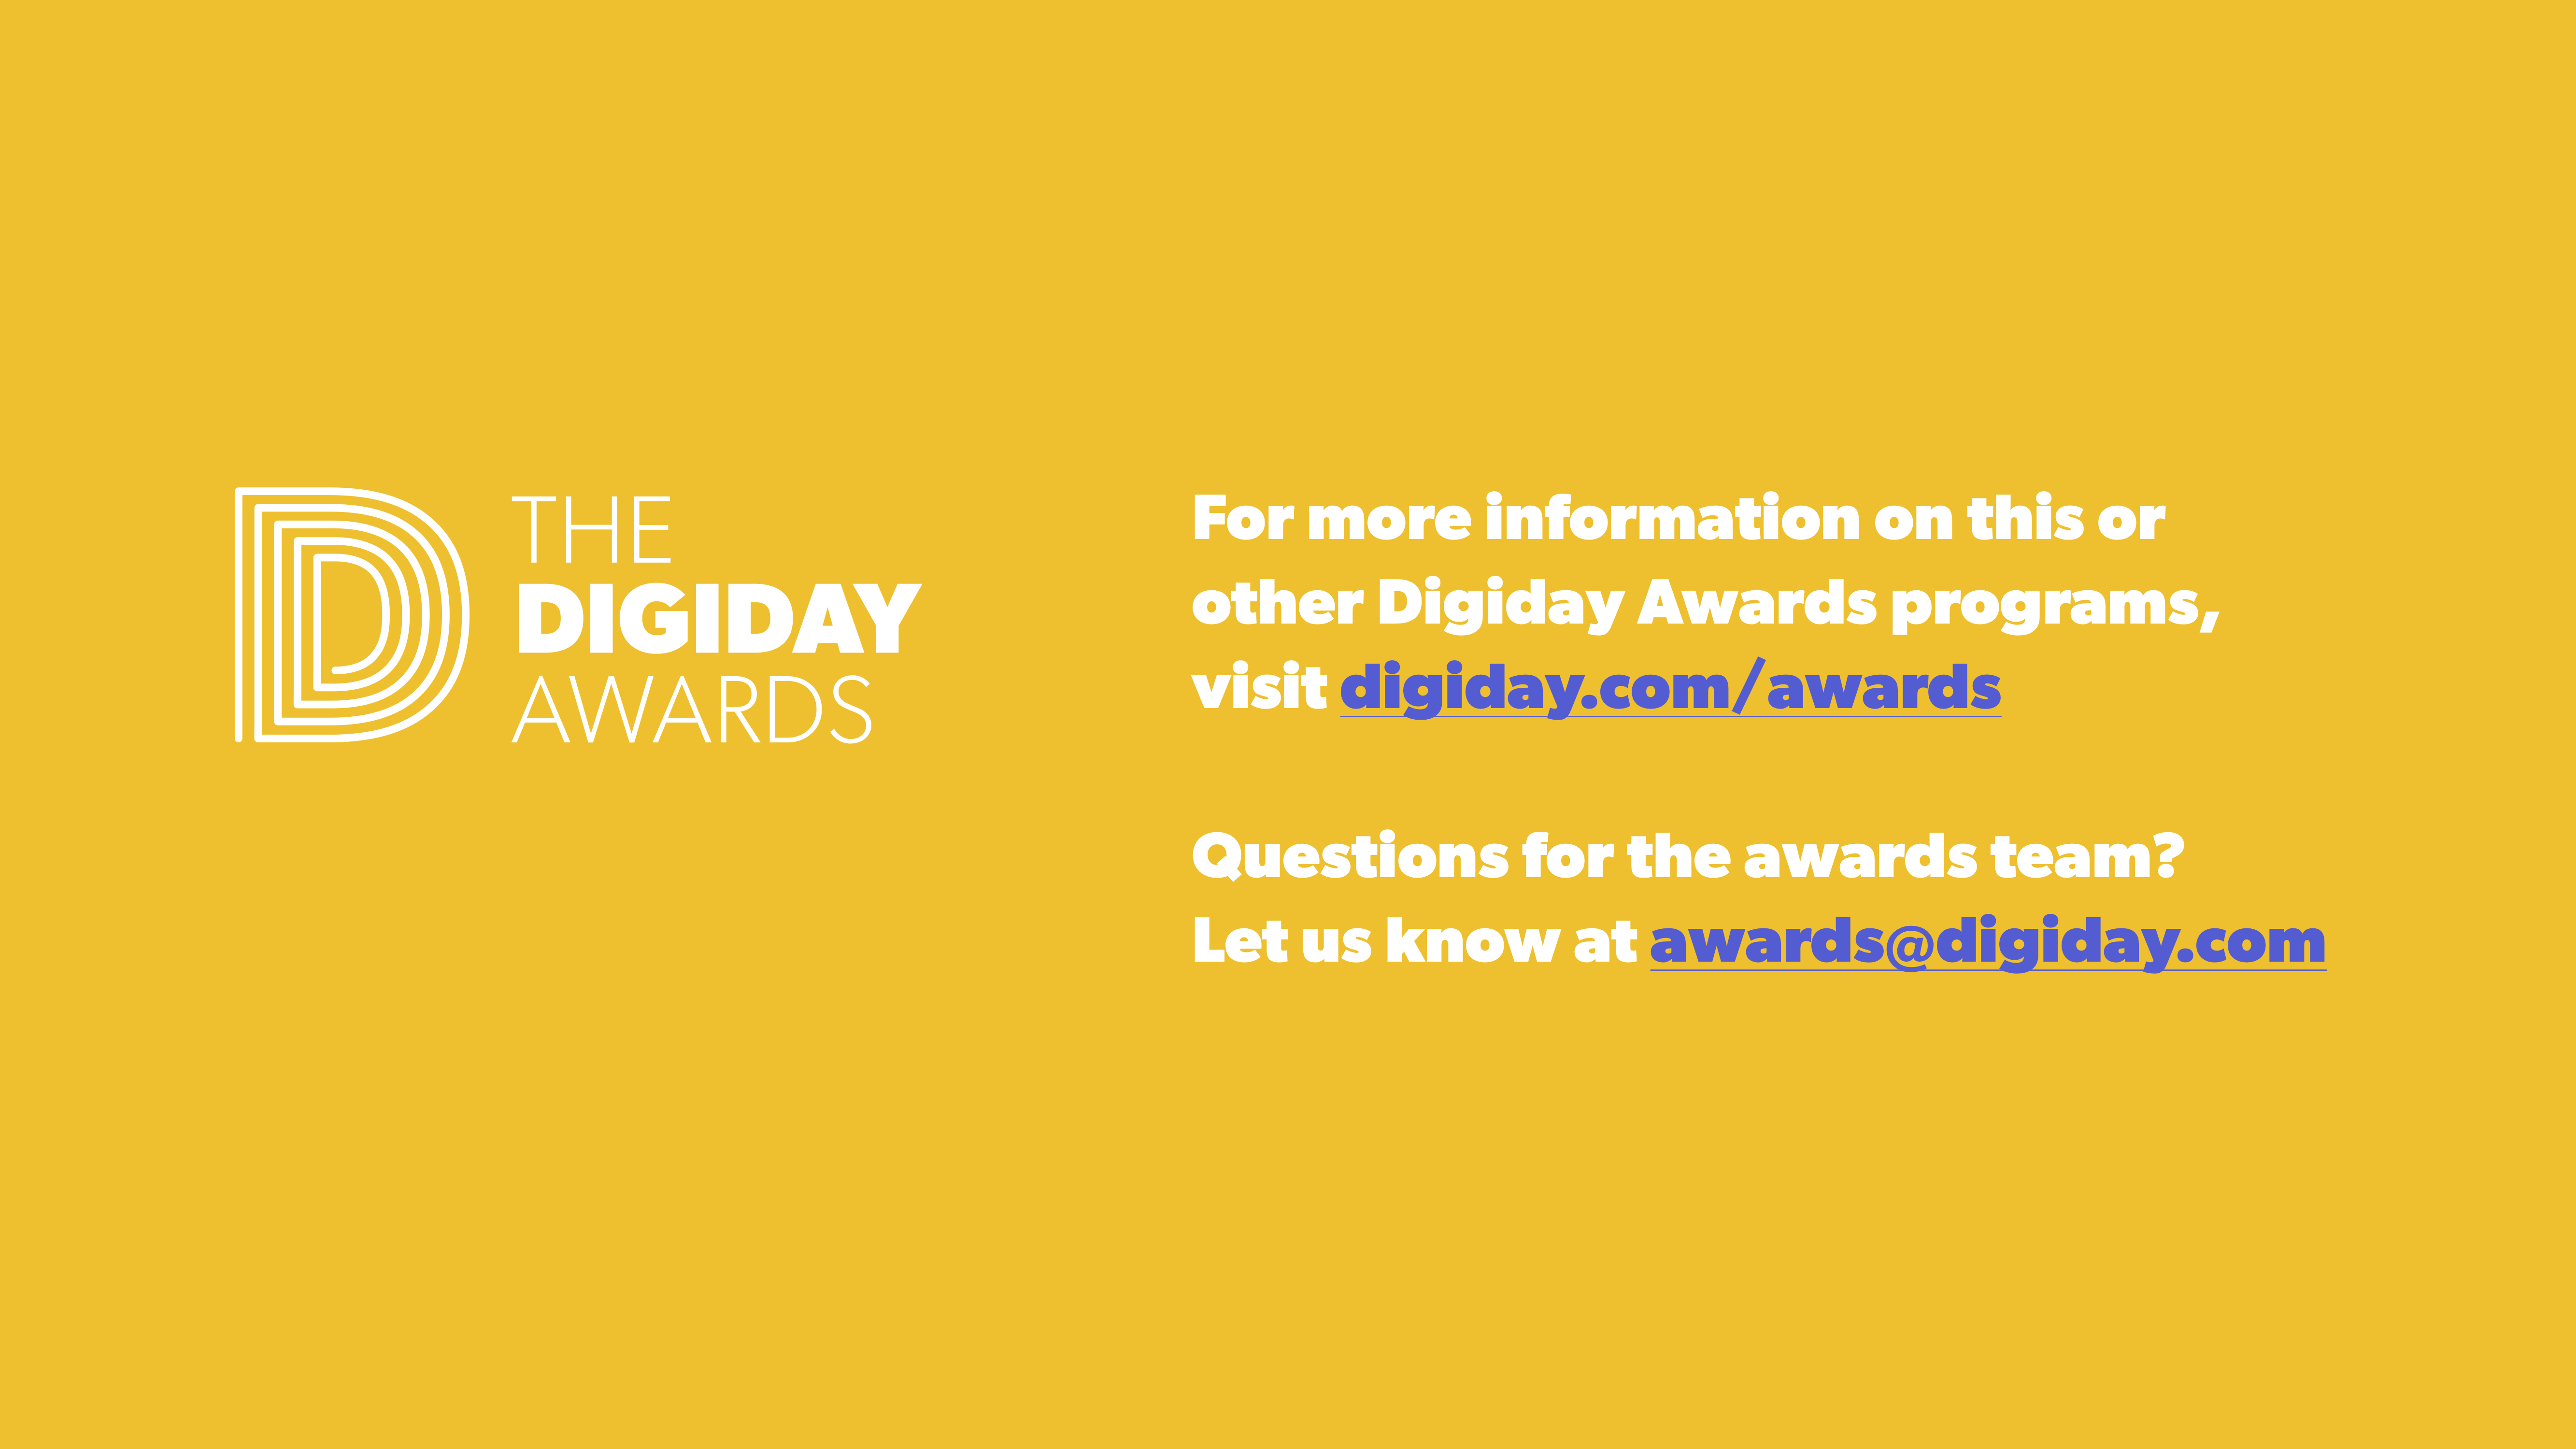 Thinking about entering the Digiday Awards? Digiday